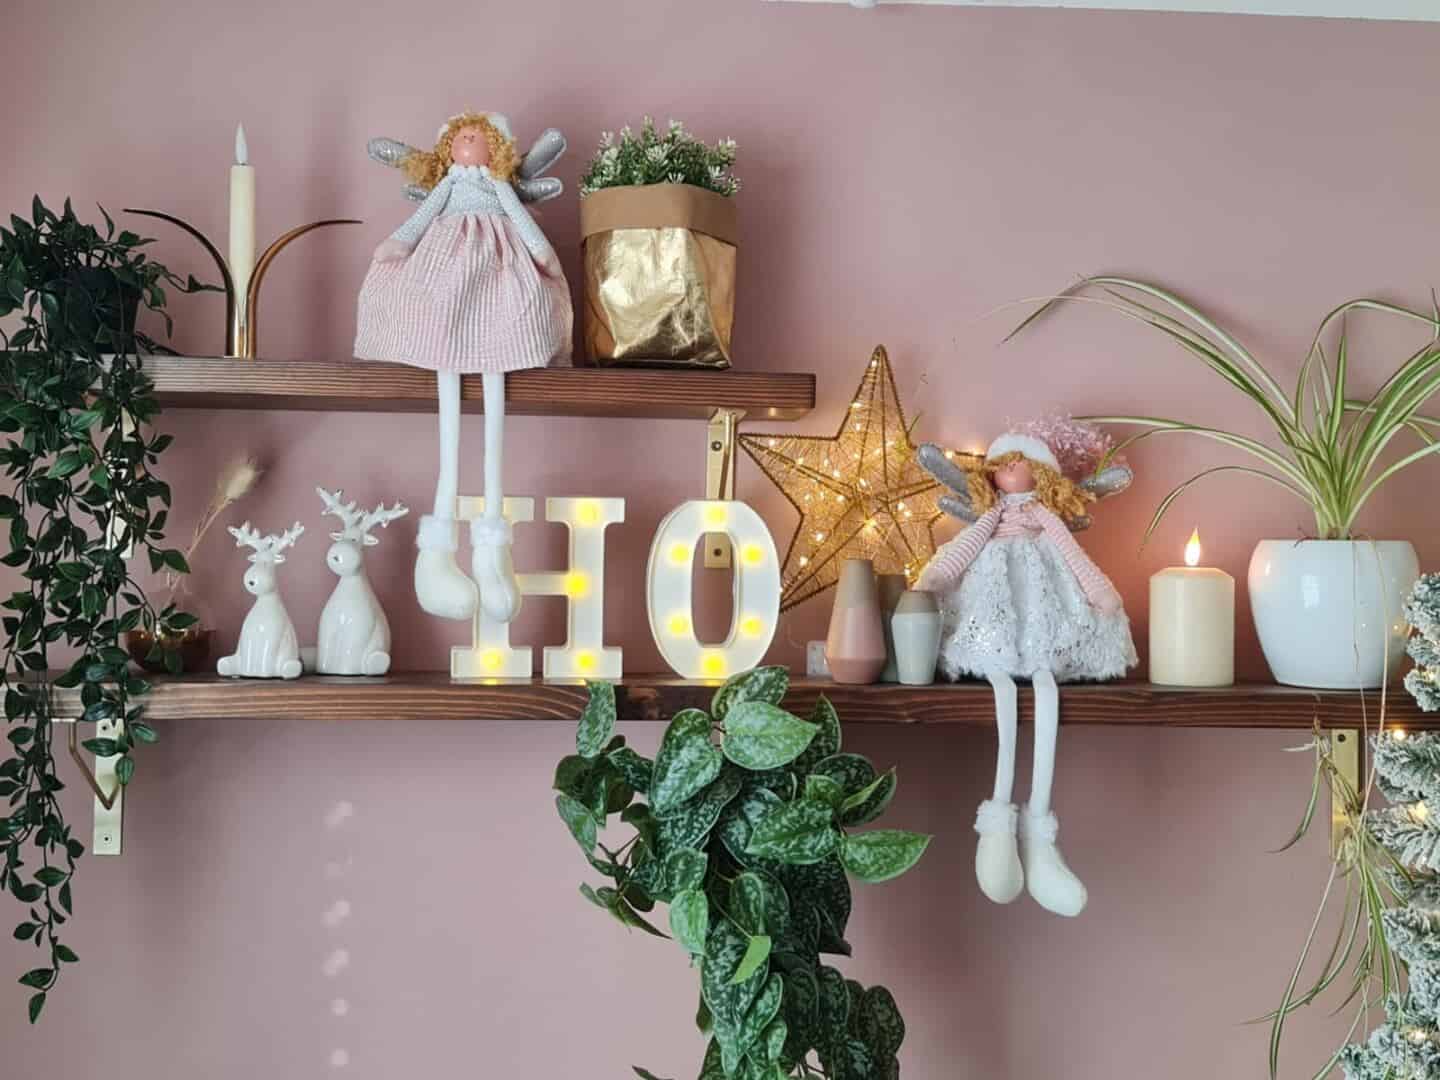 Dark wood shelves in a pink home office adored with Christmas ornaments and candles